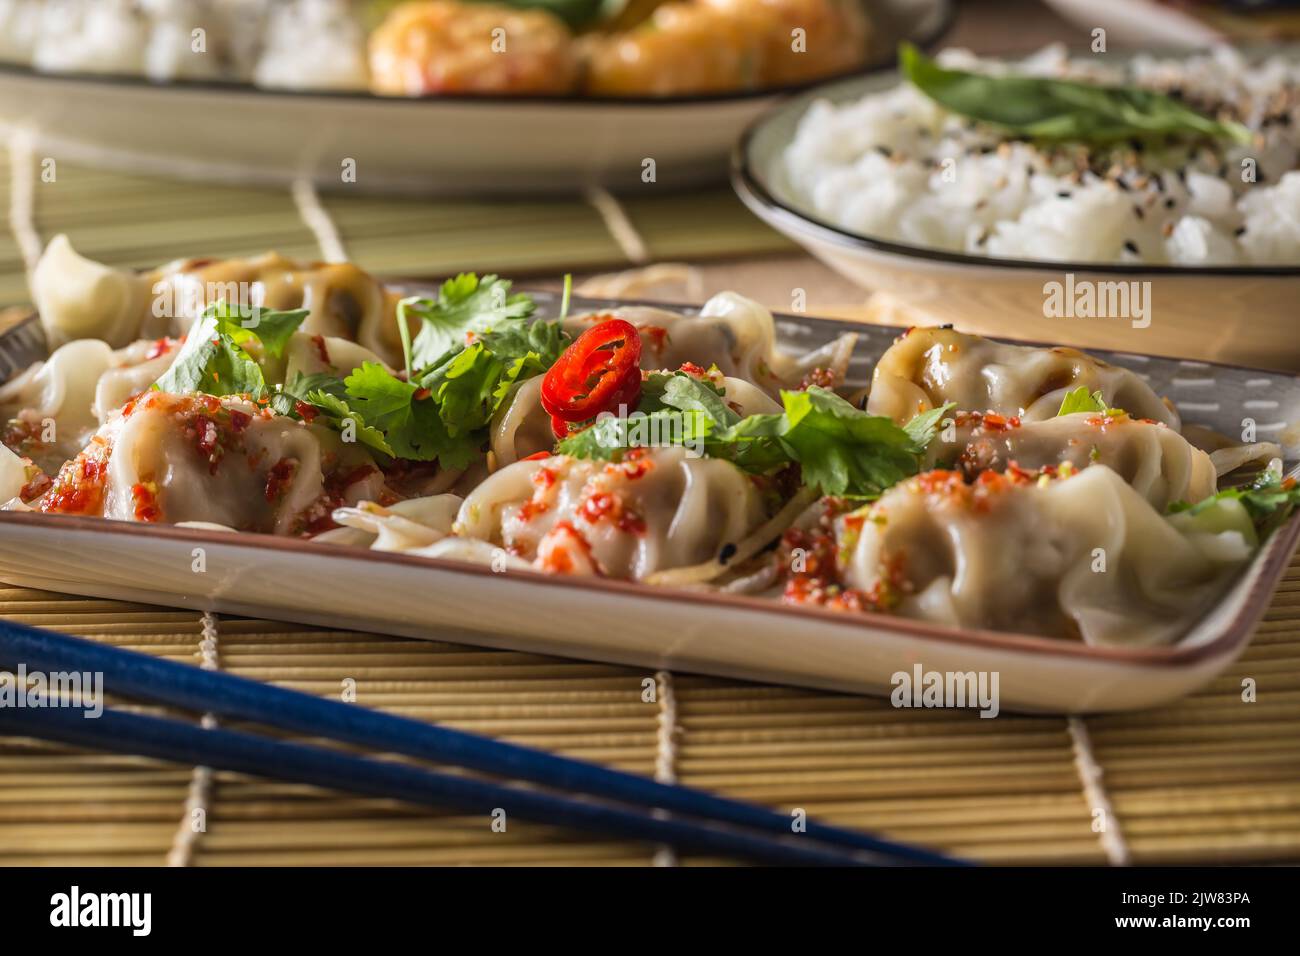 Japanese dumplings Gyoza stuffed chicken meat or vegetable with chili and herbs. Stock Photo